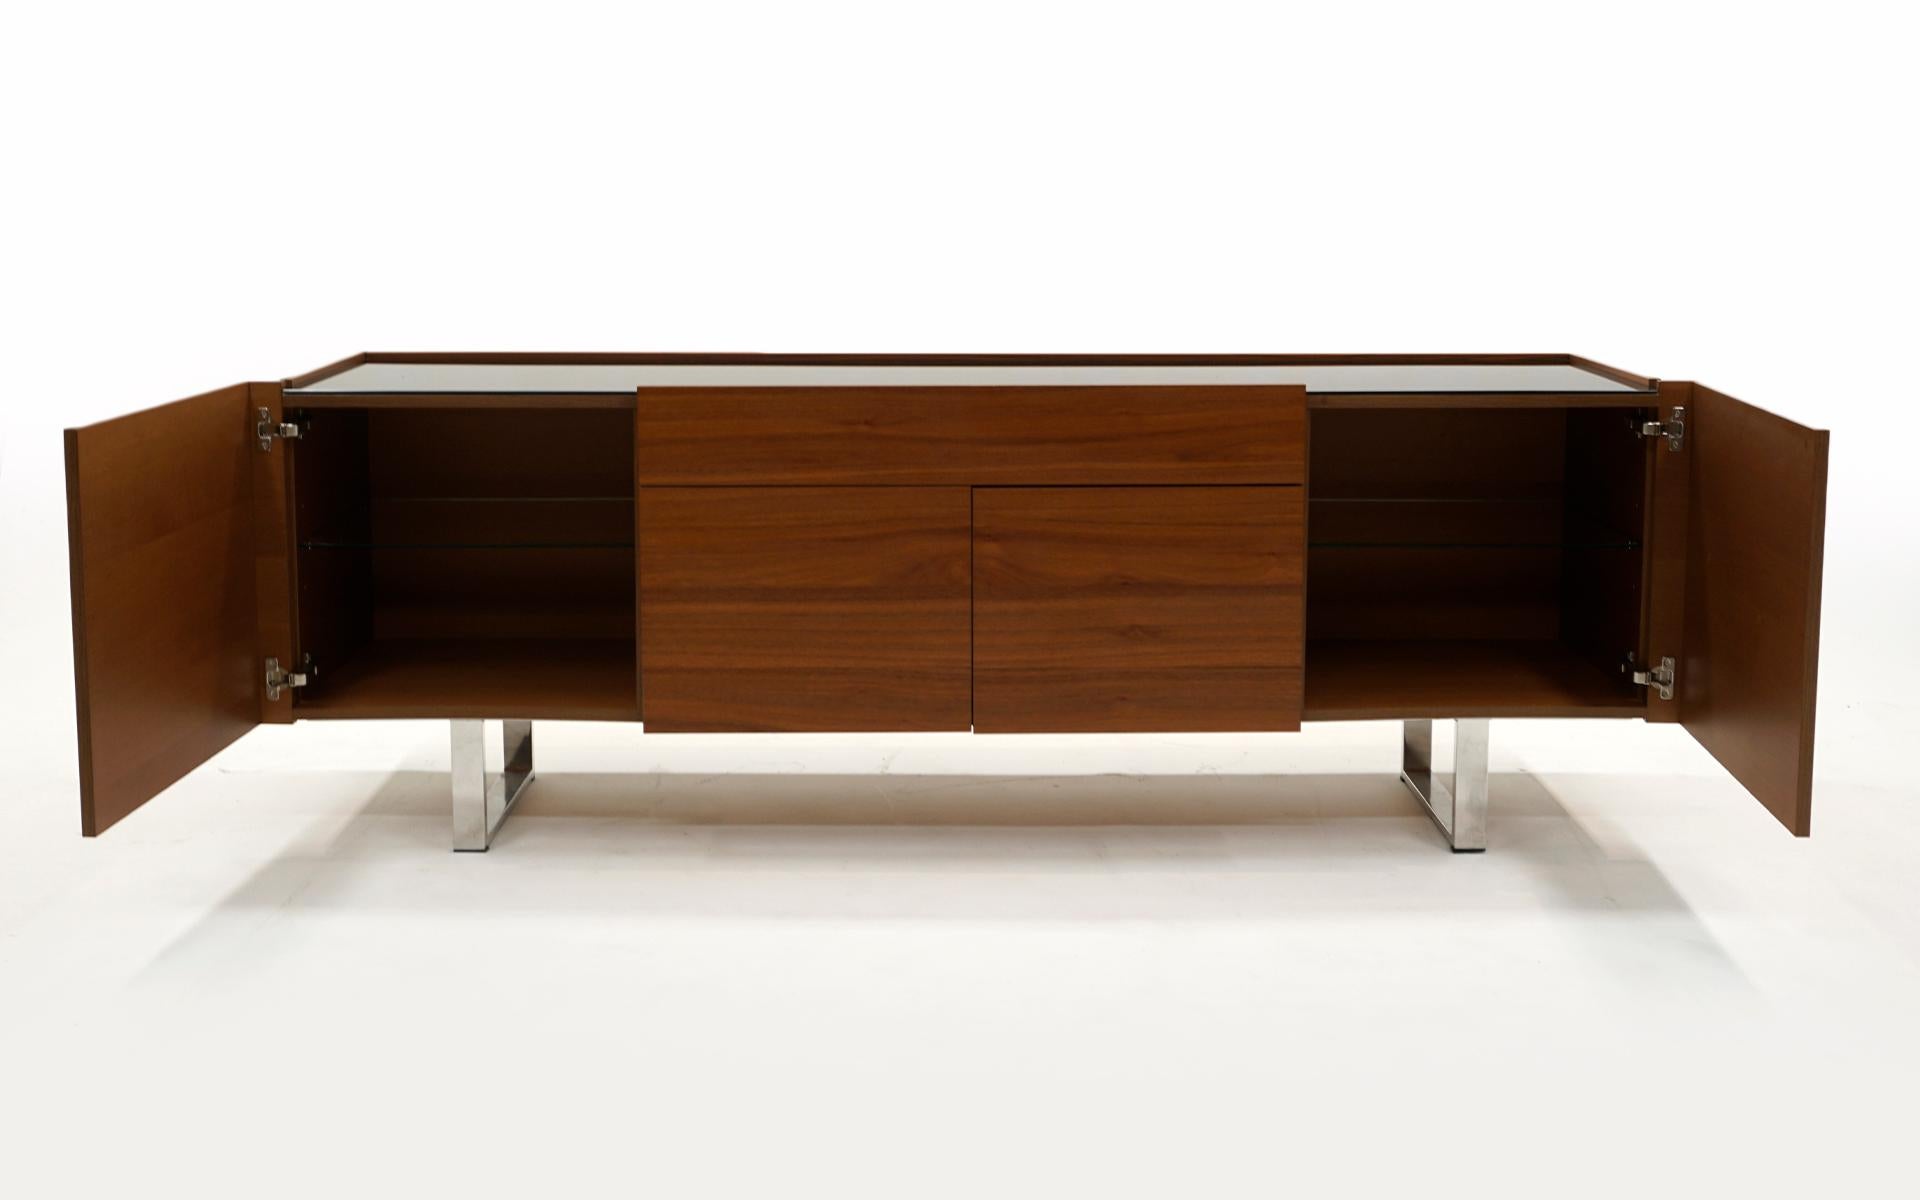 Walnut Credenza w/ Black Glass Top, Chrome Sled Base by Calligaris, Italy, 2010 In Good Condition For Sale In Kansas City, MO